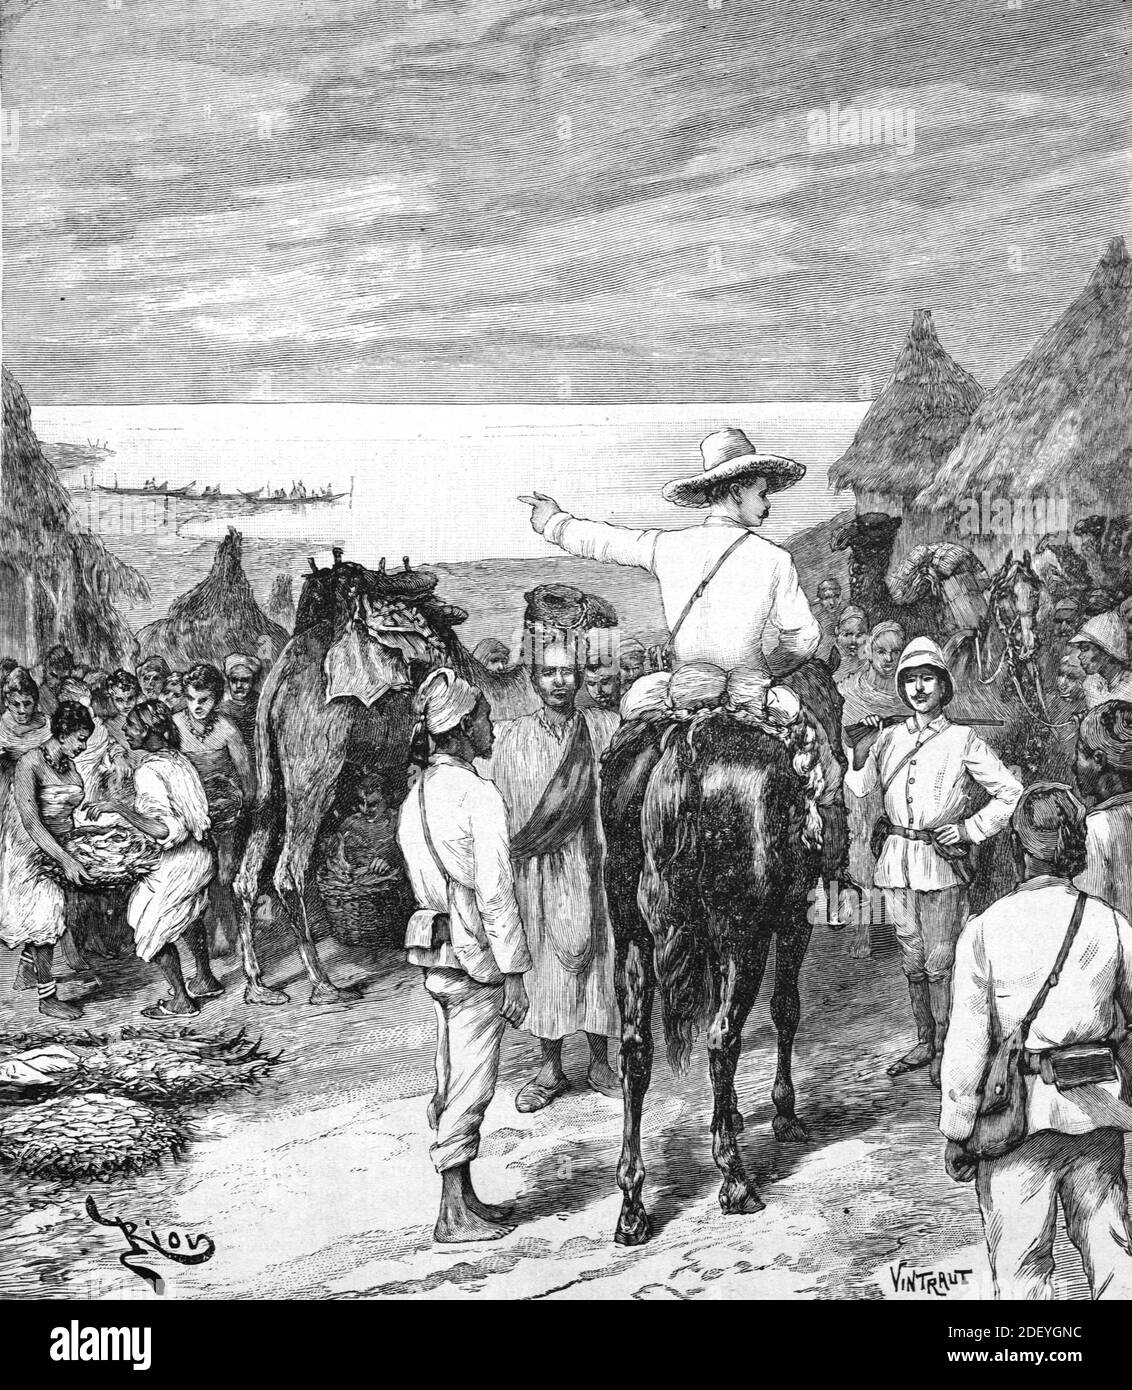 French Colonial Officers at N'Guigmi on the Shores of Lake Chad Niger (Engr 1895) The Lake has since shrunk and N'Guigmi no longer lies on its shores. Vintage Illustration or Engraving Stock Photo